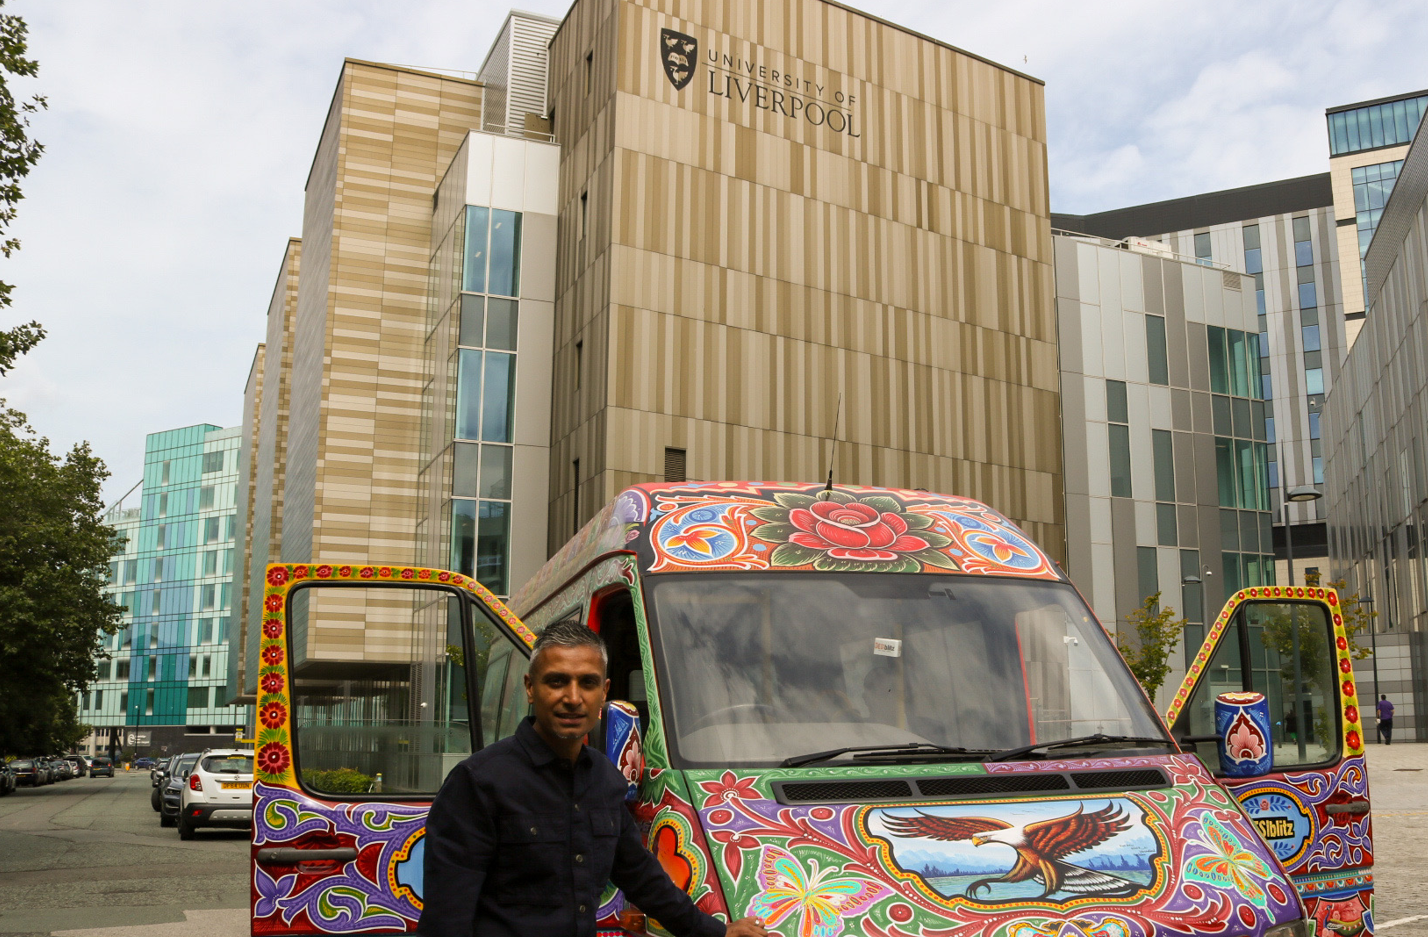 the DESIblitz Punjabi Truck Art bus in front of a building with a university of liverpool sign